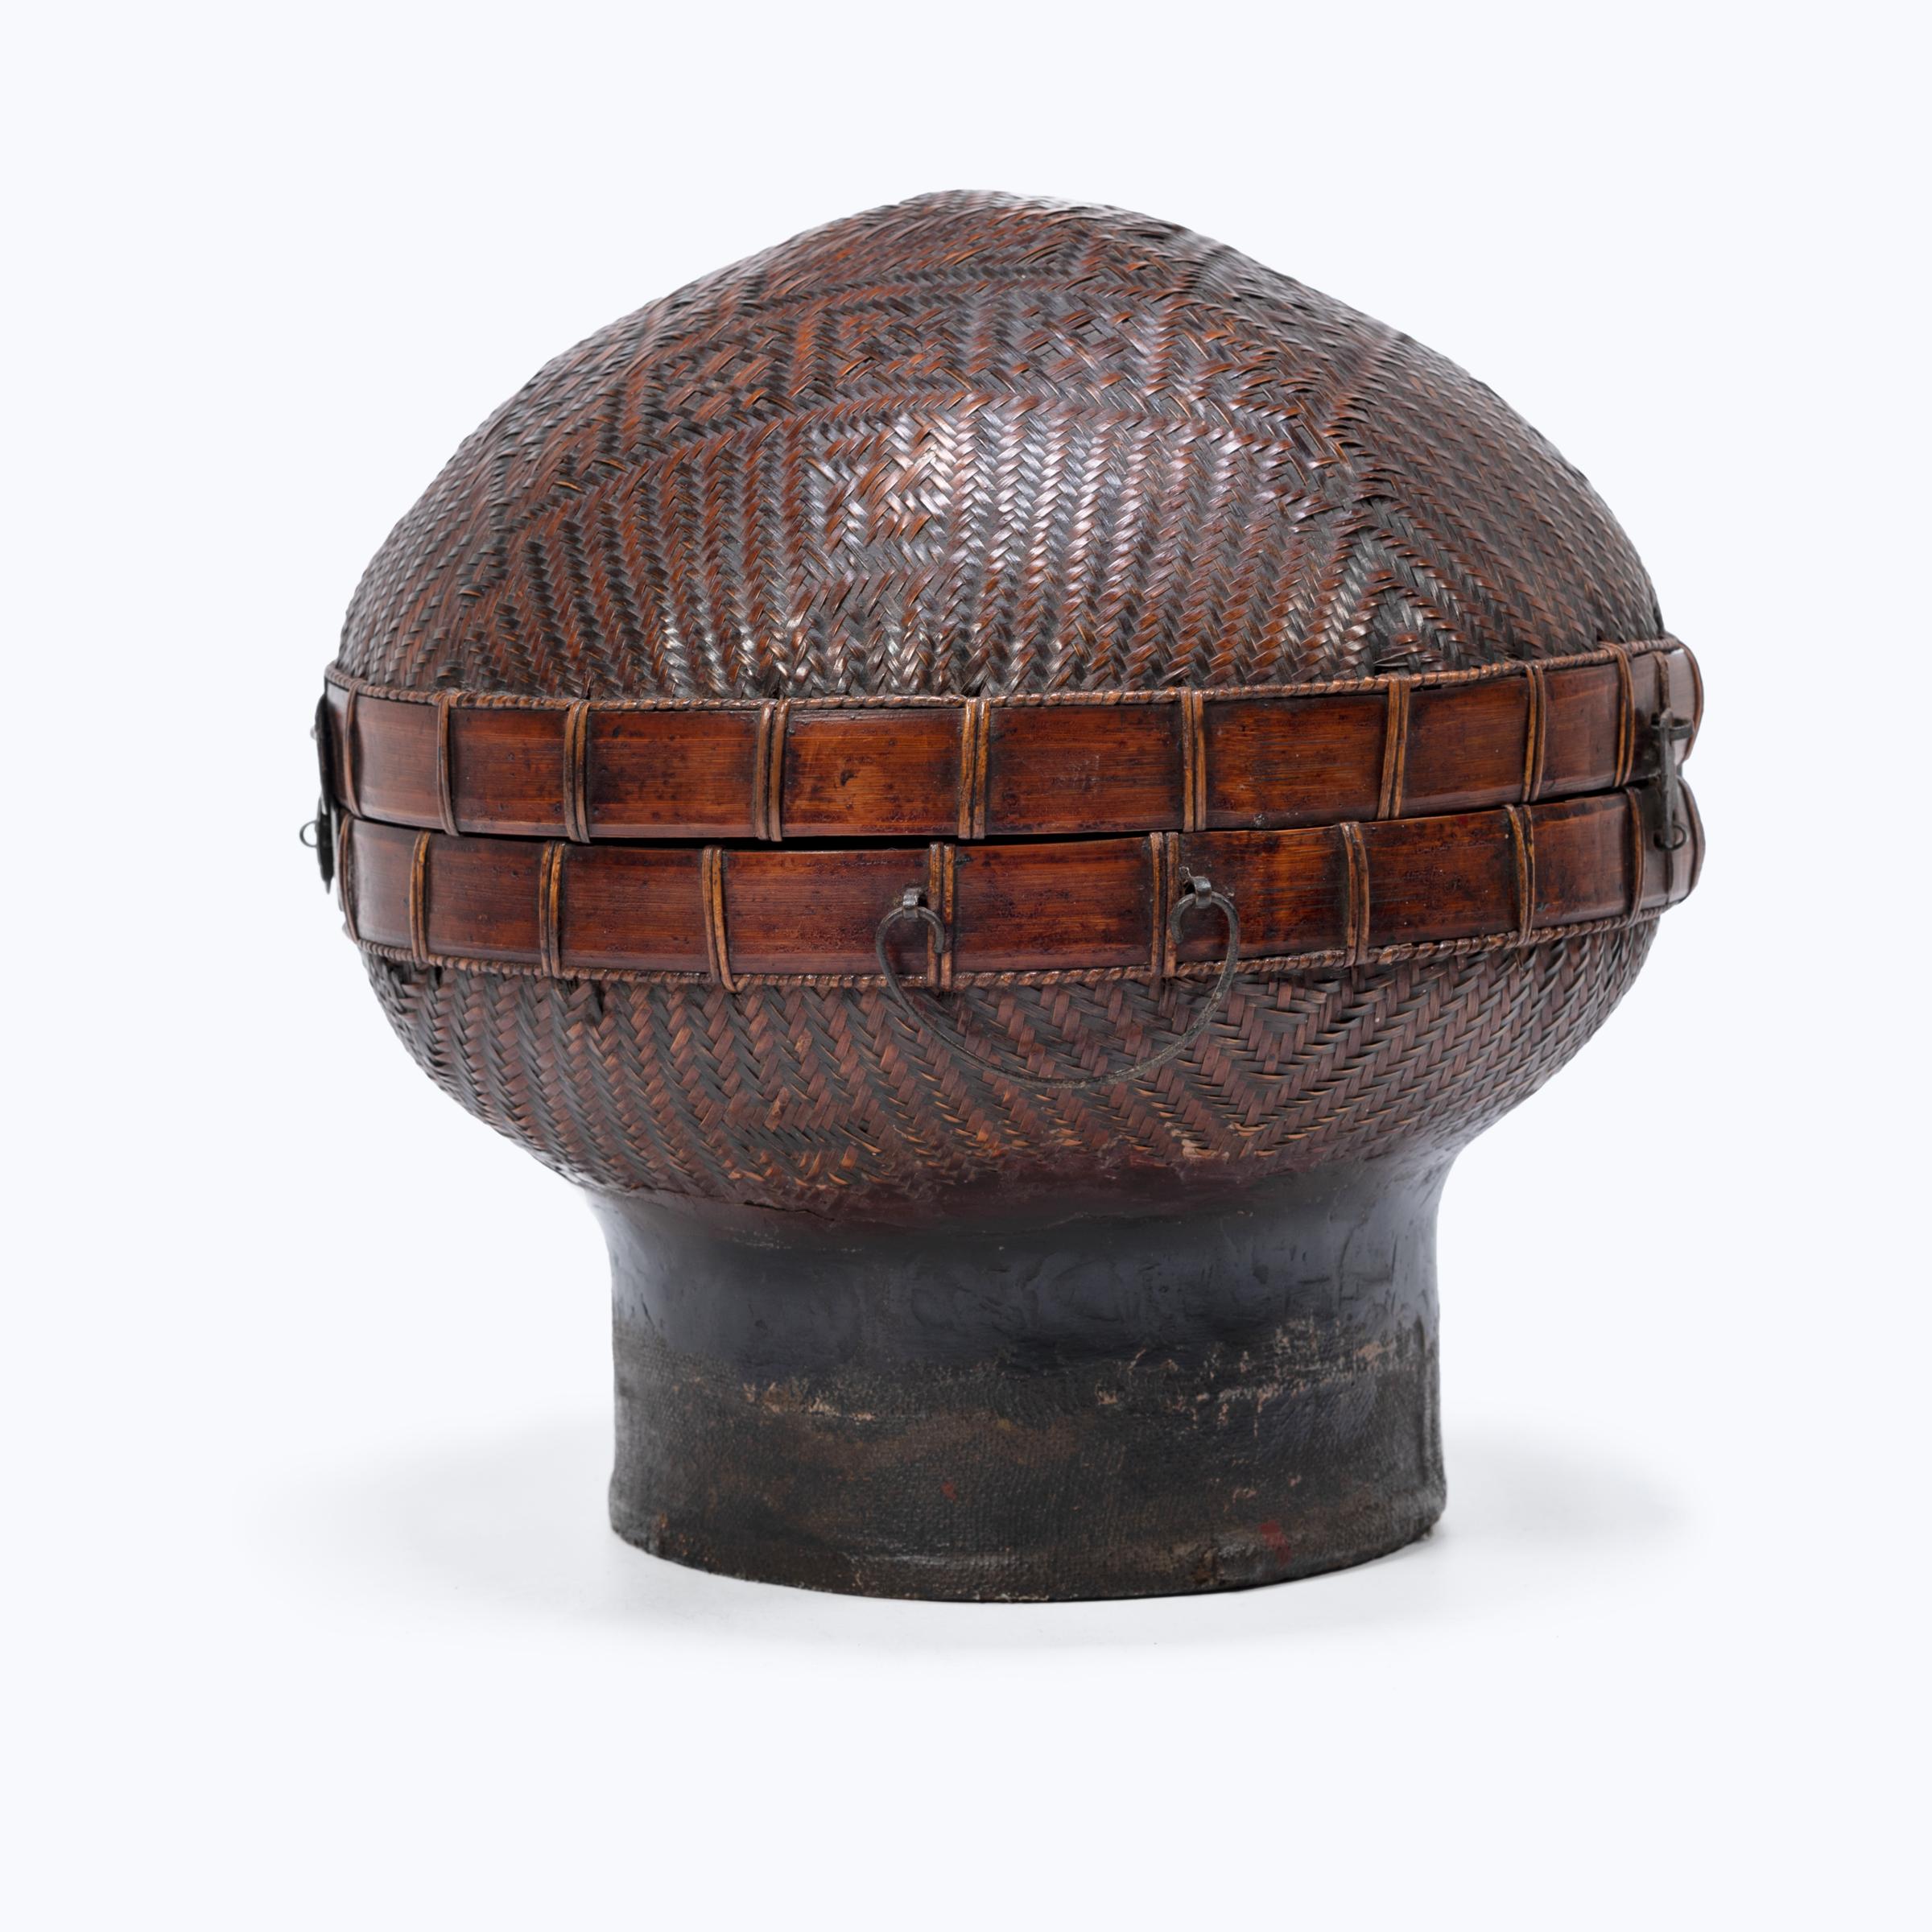 No self-respecting man in Qing-dynasty China would leave the house without some kind of hat. In fact, headgear was so central to social status that even the containers used to store one's hat were beautifully constructed. This 19th-century